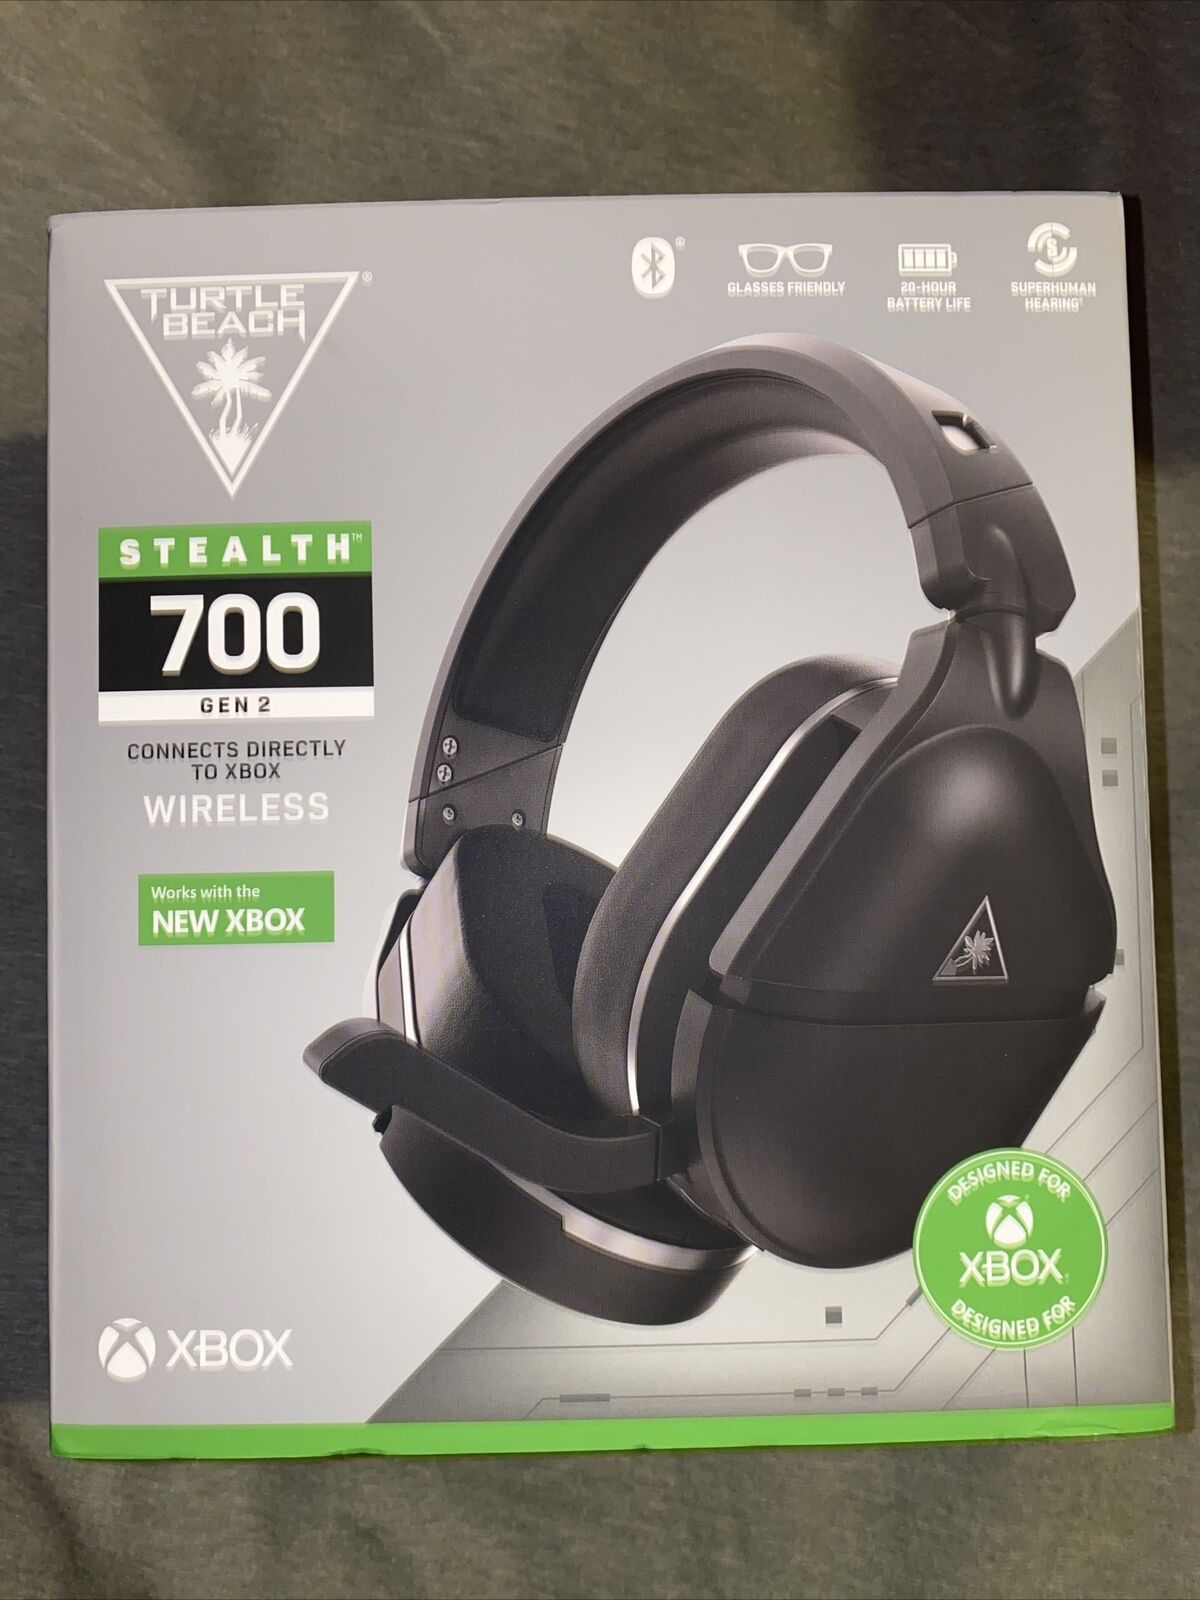 New Turtle Beach Stealth 700 Gen 2 Wireless Gaming Headset for Xbox One/Series X - Black